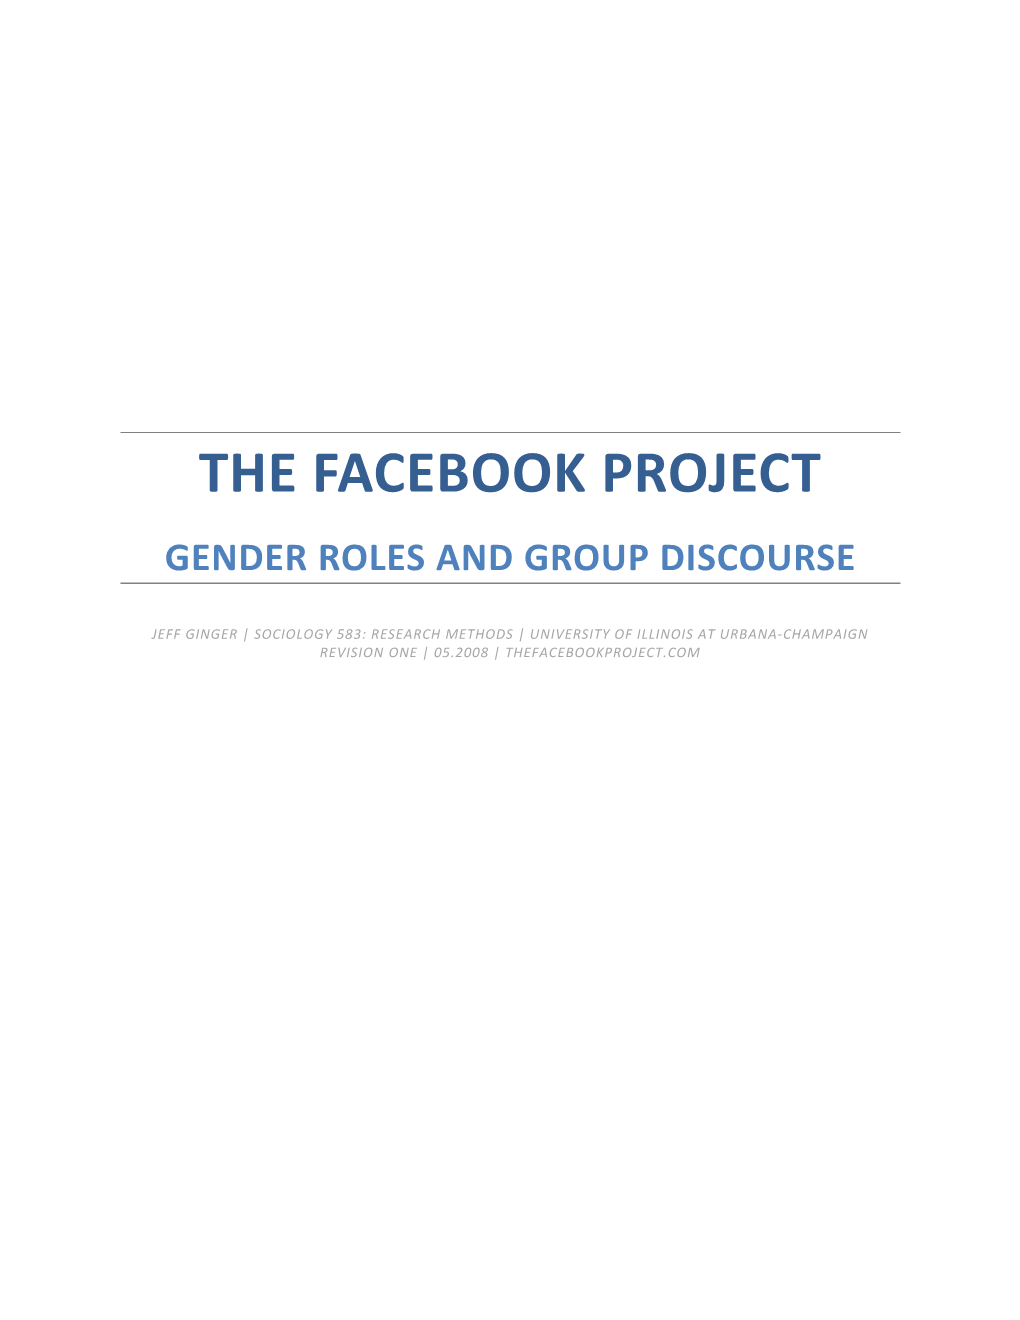 The Facebook Project Gender Roles and Group Discourse